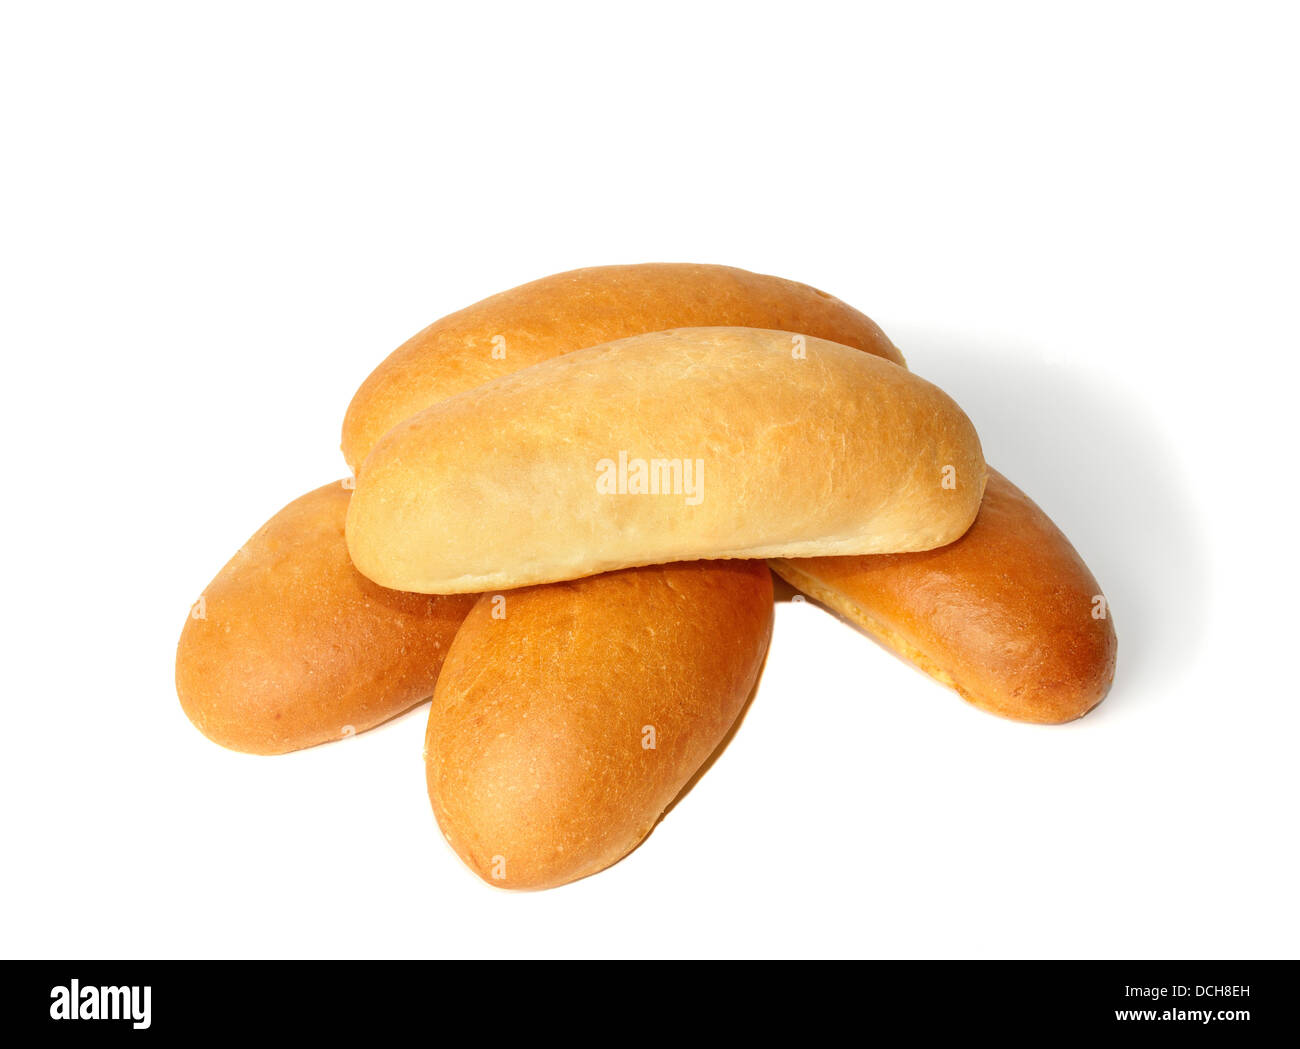 Several hot dog buns isolated over white Stock Photo